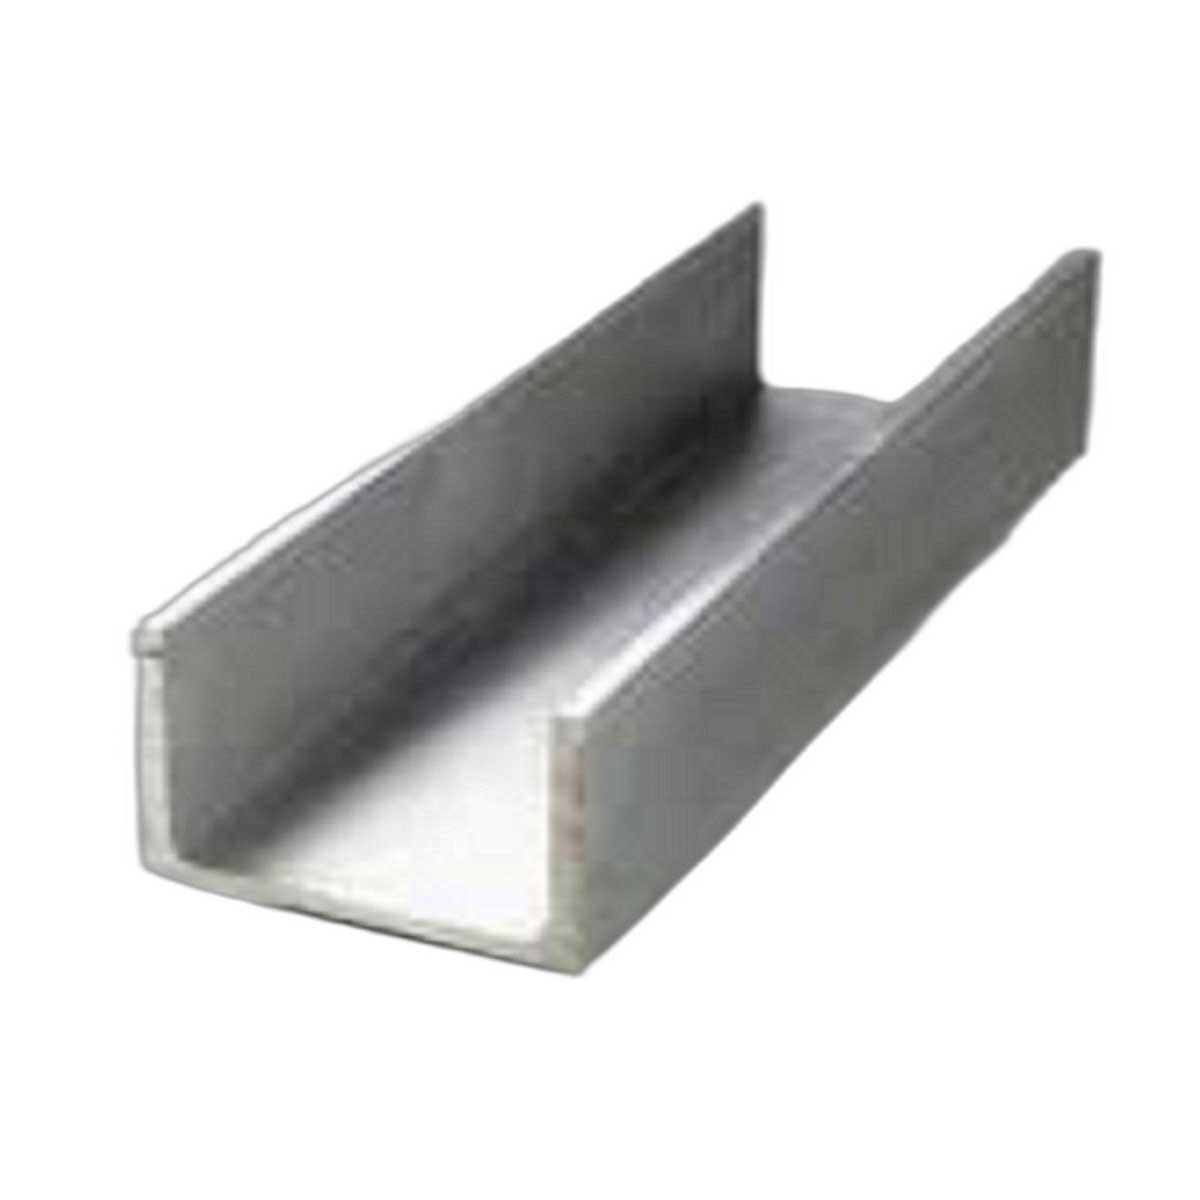 Aluminium U Shaped Channel Manufacturers, Suppliers in Rohtak